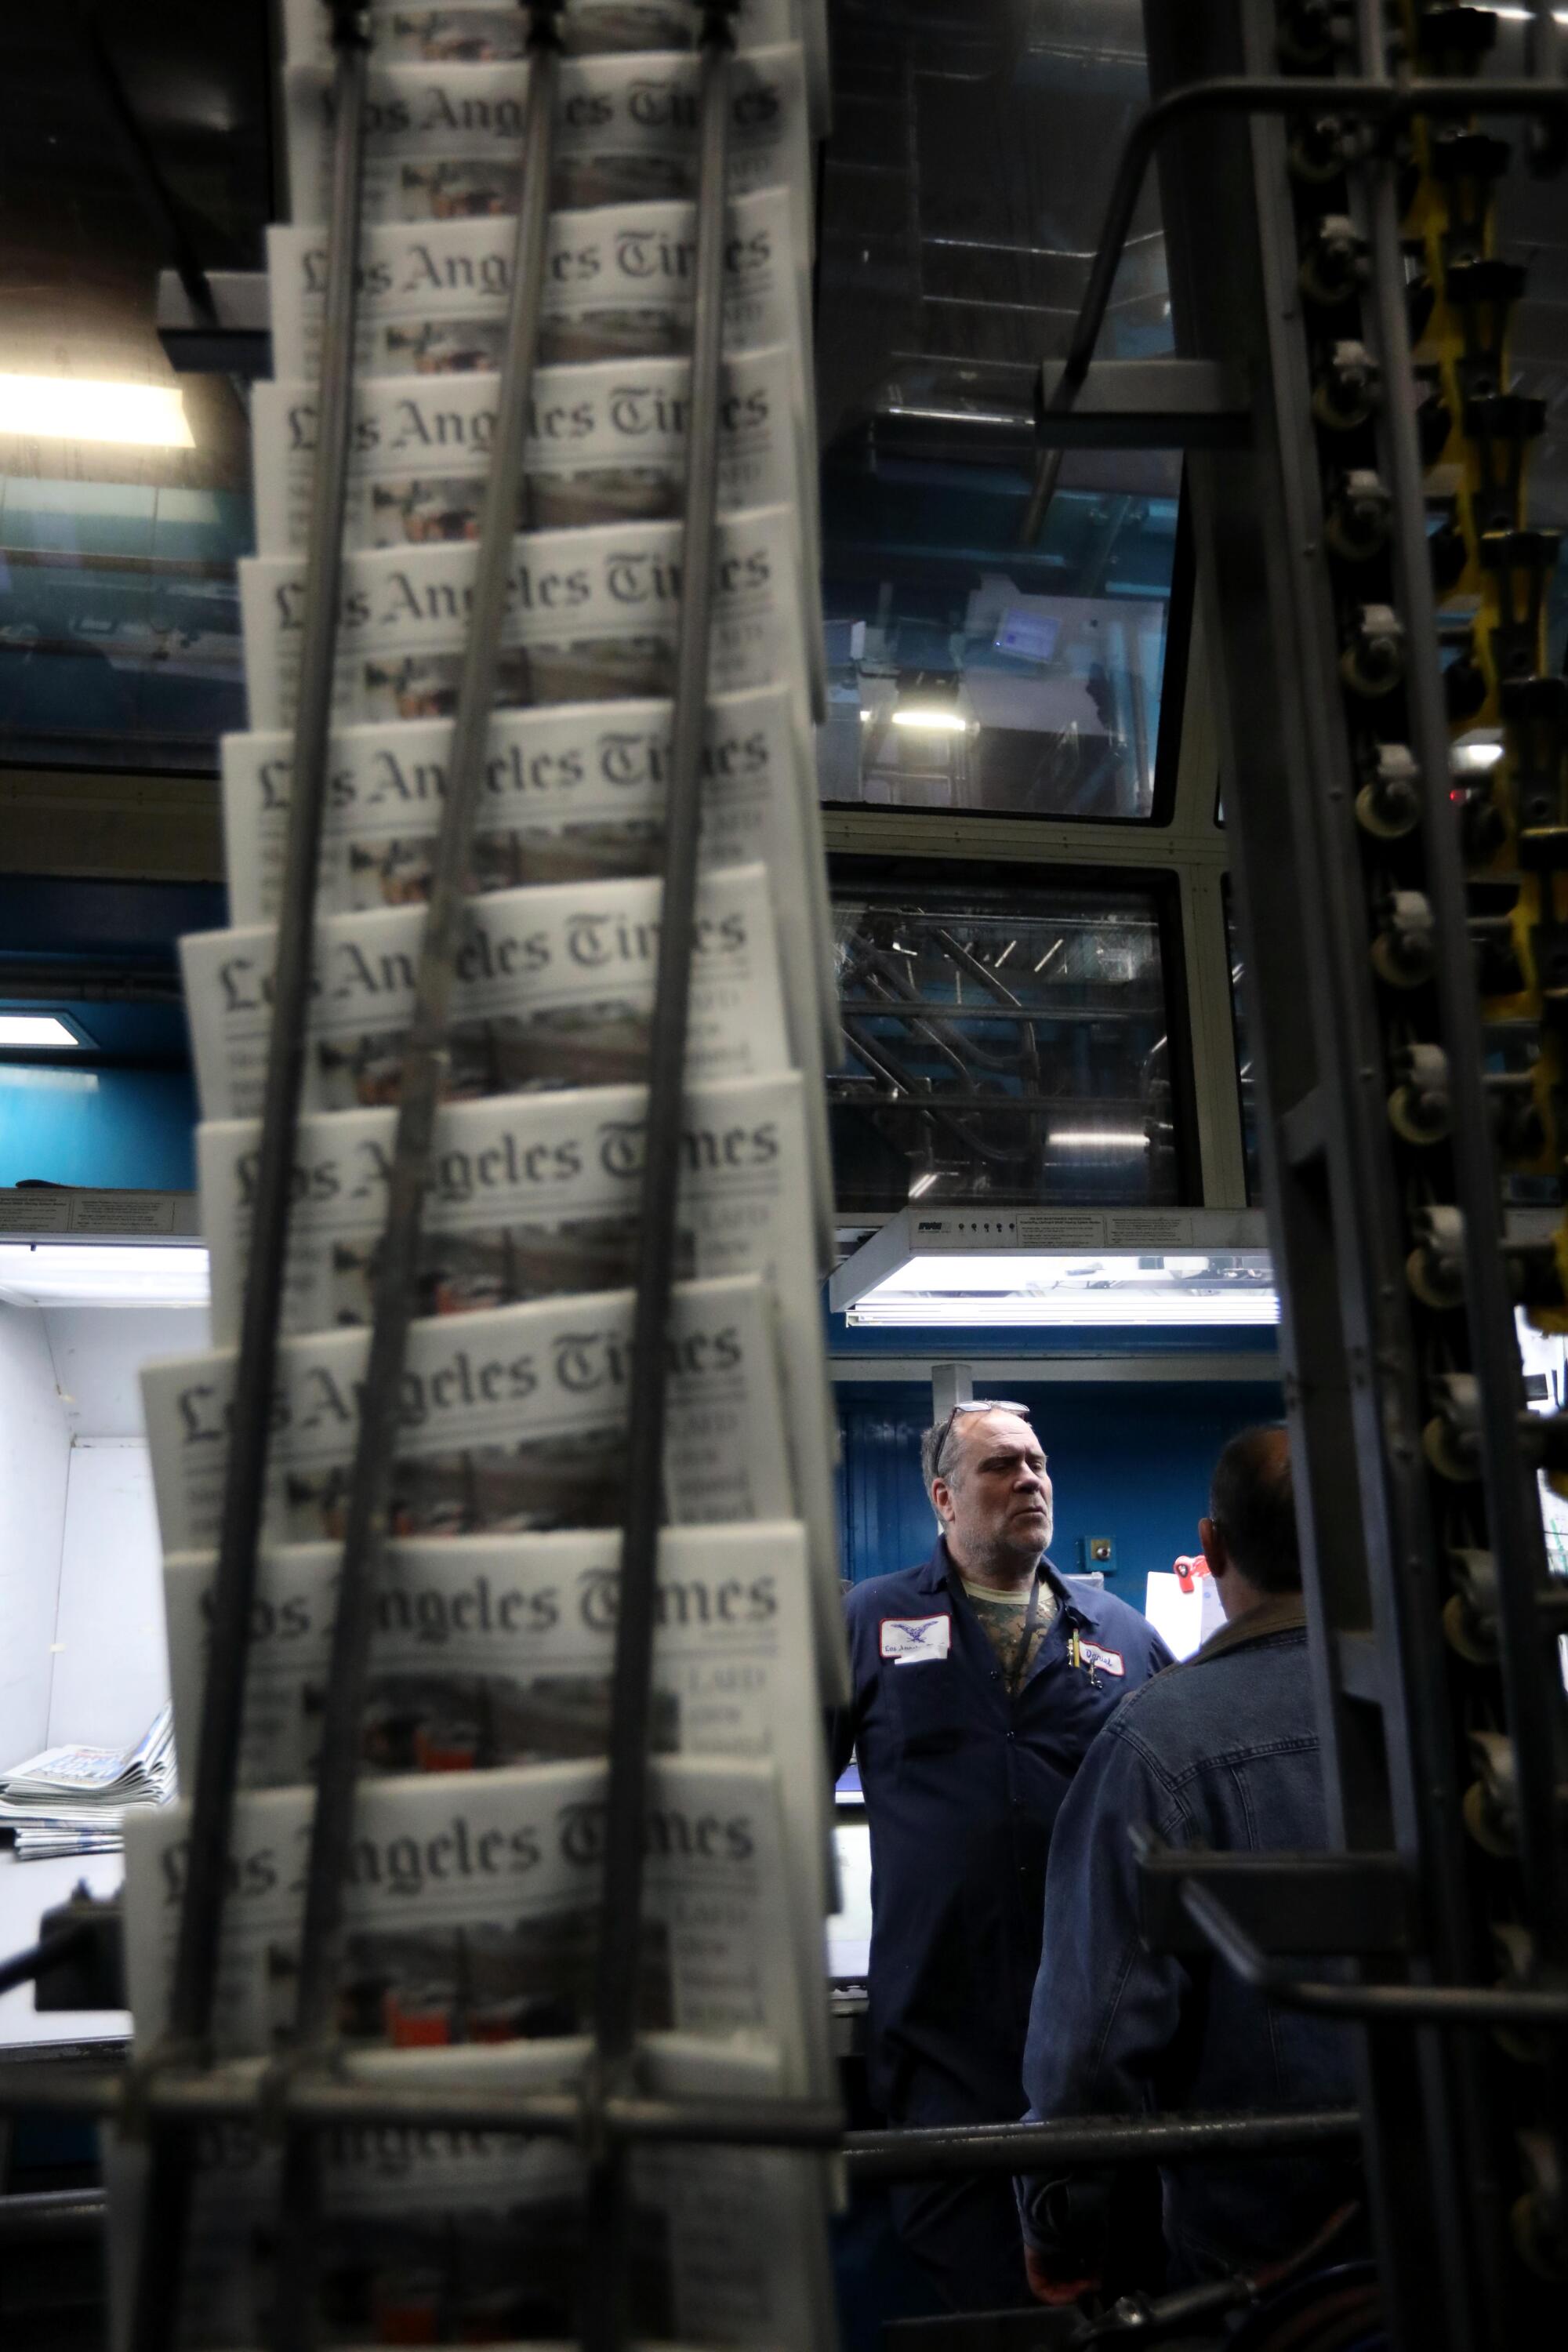 First color pressman Daniel Koval stands near a conveyor belt that transports Times newspapers.